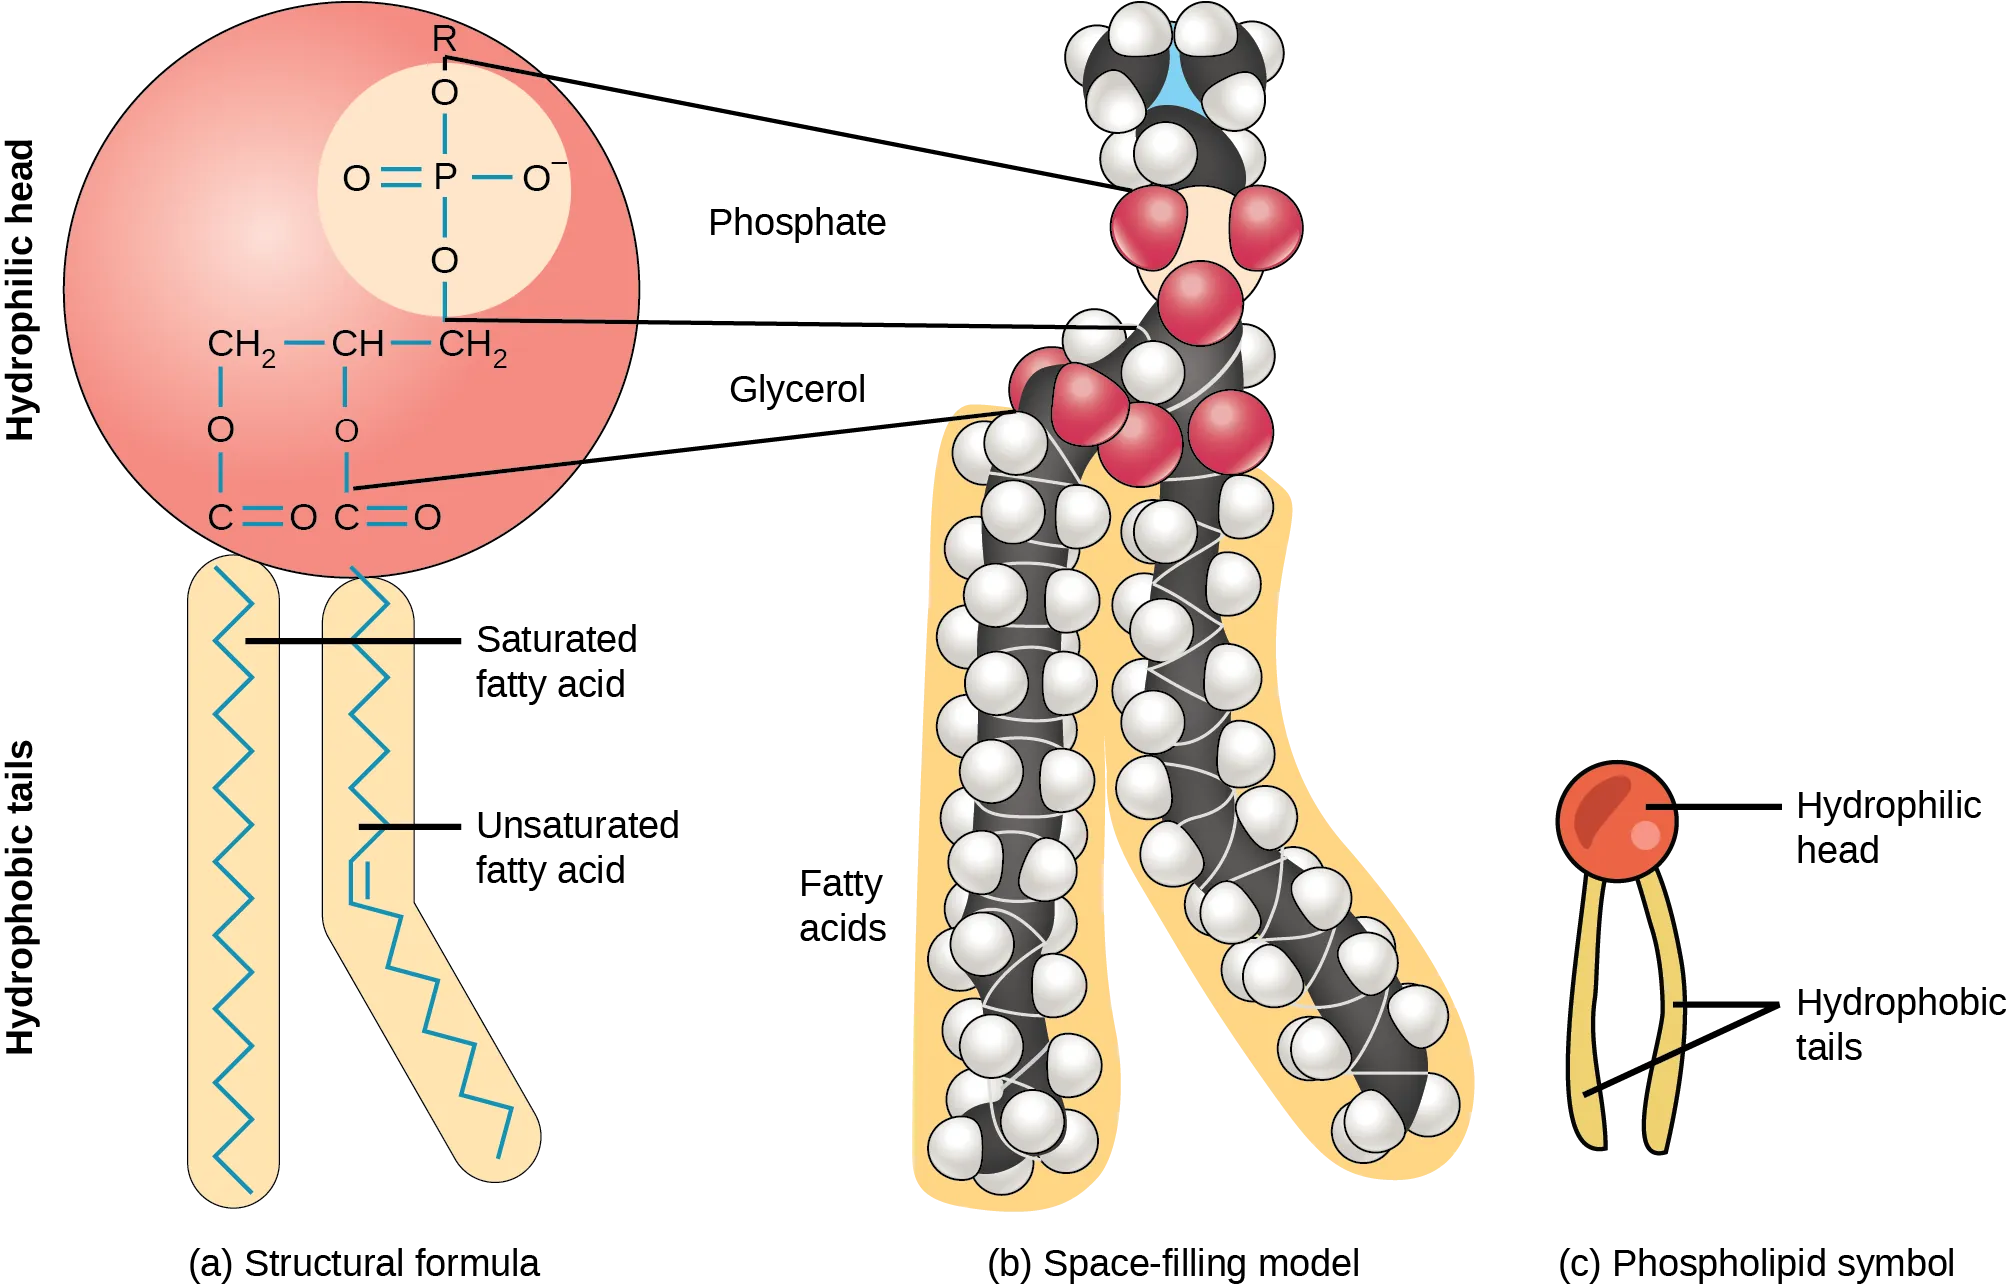 The molecular structure of a phospholipid is shown. It consists of two fatty acids attached to the first and second carbons in glycerol, and a phosphate group attached to the third position. The phosphate group may be further modified by addition of another molecule to one of its oxygens. Two molecules that may modify the phosphate group, choline and serine, are shown. Choline consists of a two-carbon chain with a hydroxy group attached to one end and a nitrogen attached to the other. The nitrogen, in turn, has three methyl groups attached to it and has a charge of plus one. Serine consists of a two-carbon chain with a hydroxyl group attached to one end. An amino group and a carboxyl group are attached to the other end.